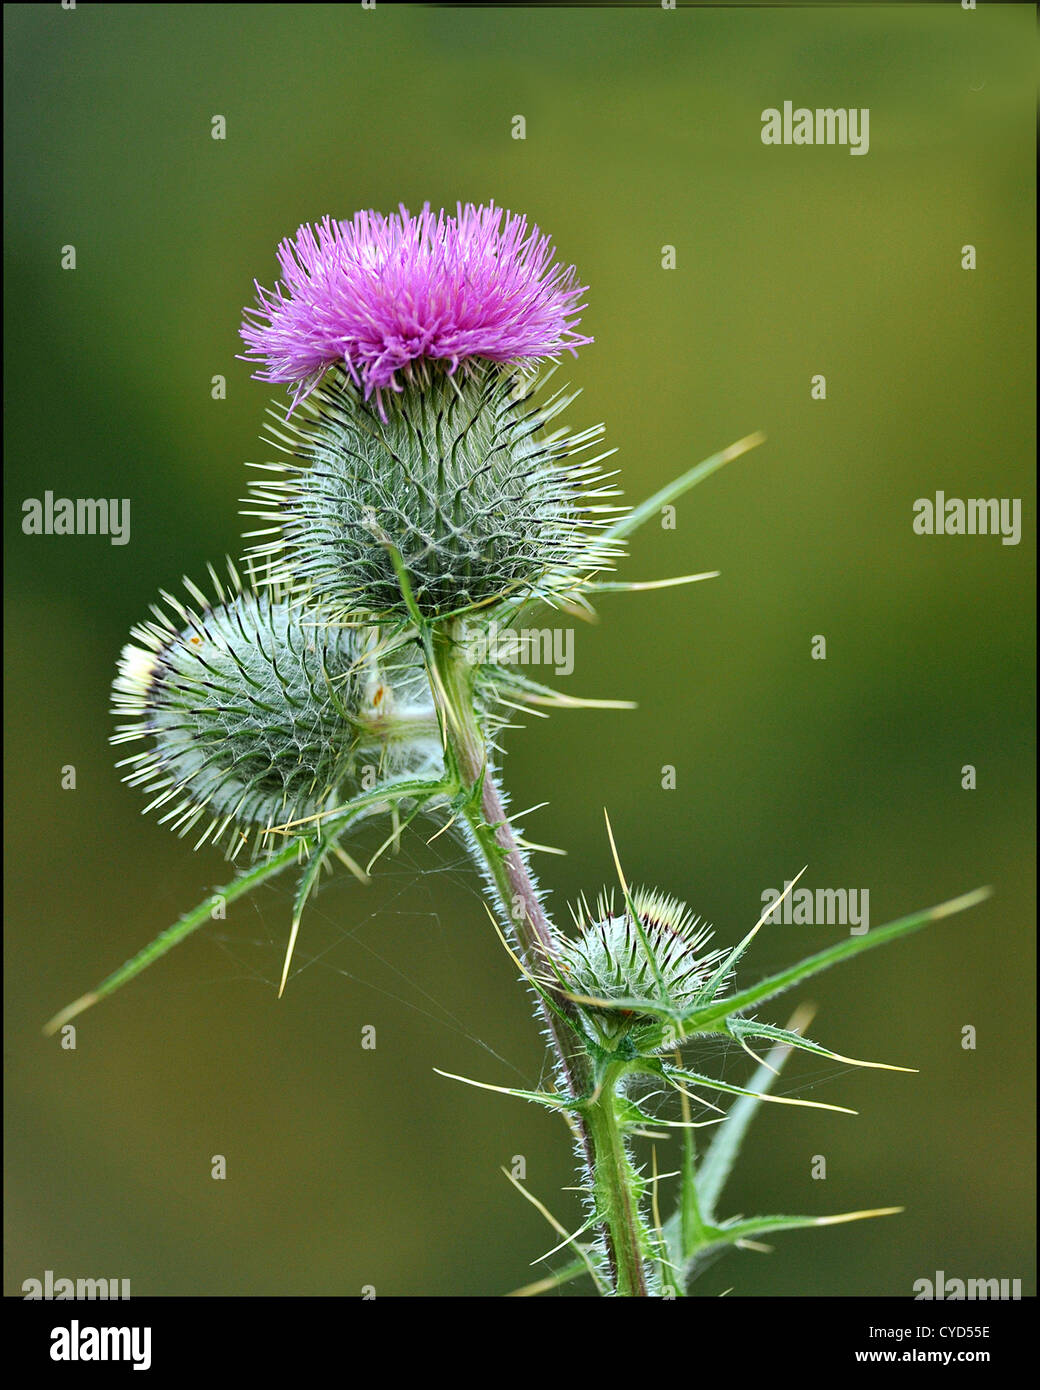 a scottish thistle an iconic plant in scotland Stock Photo